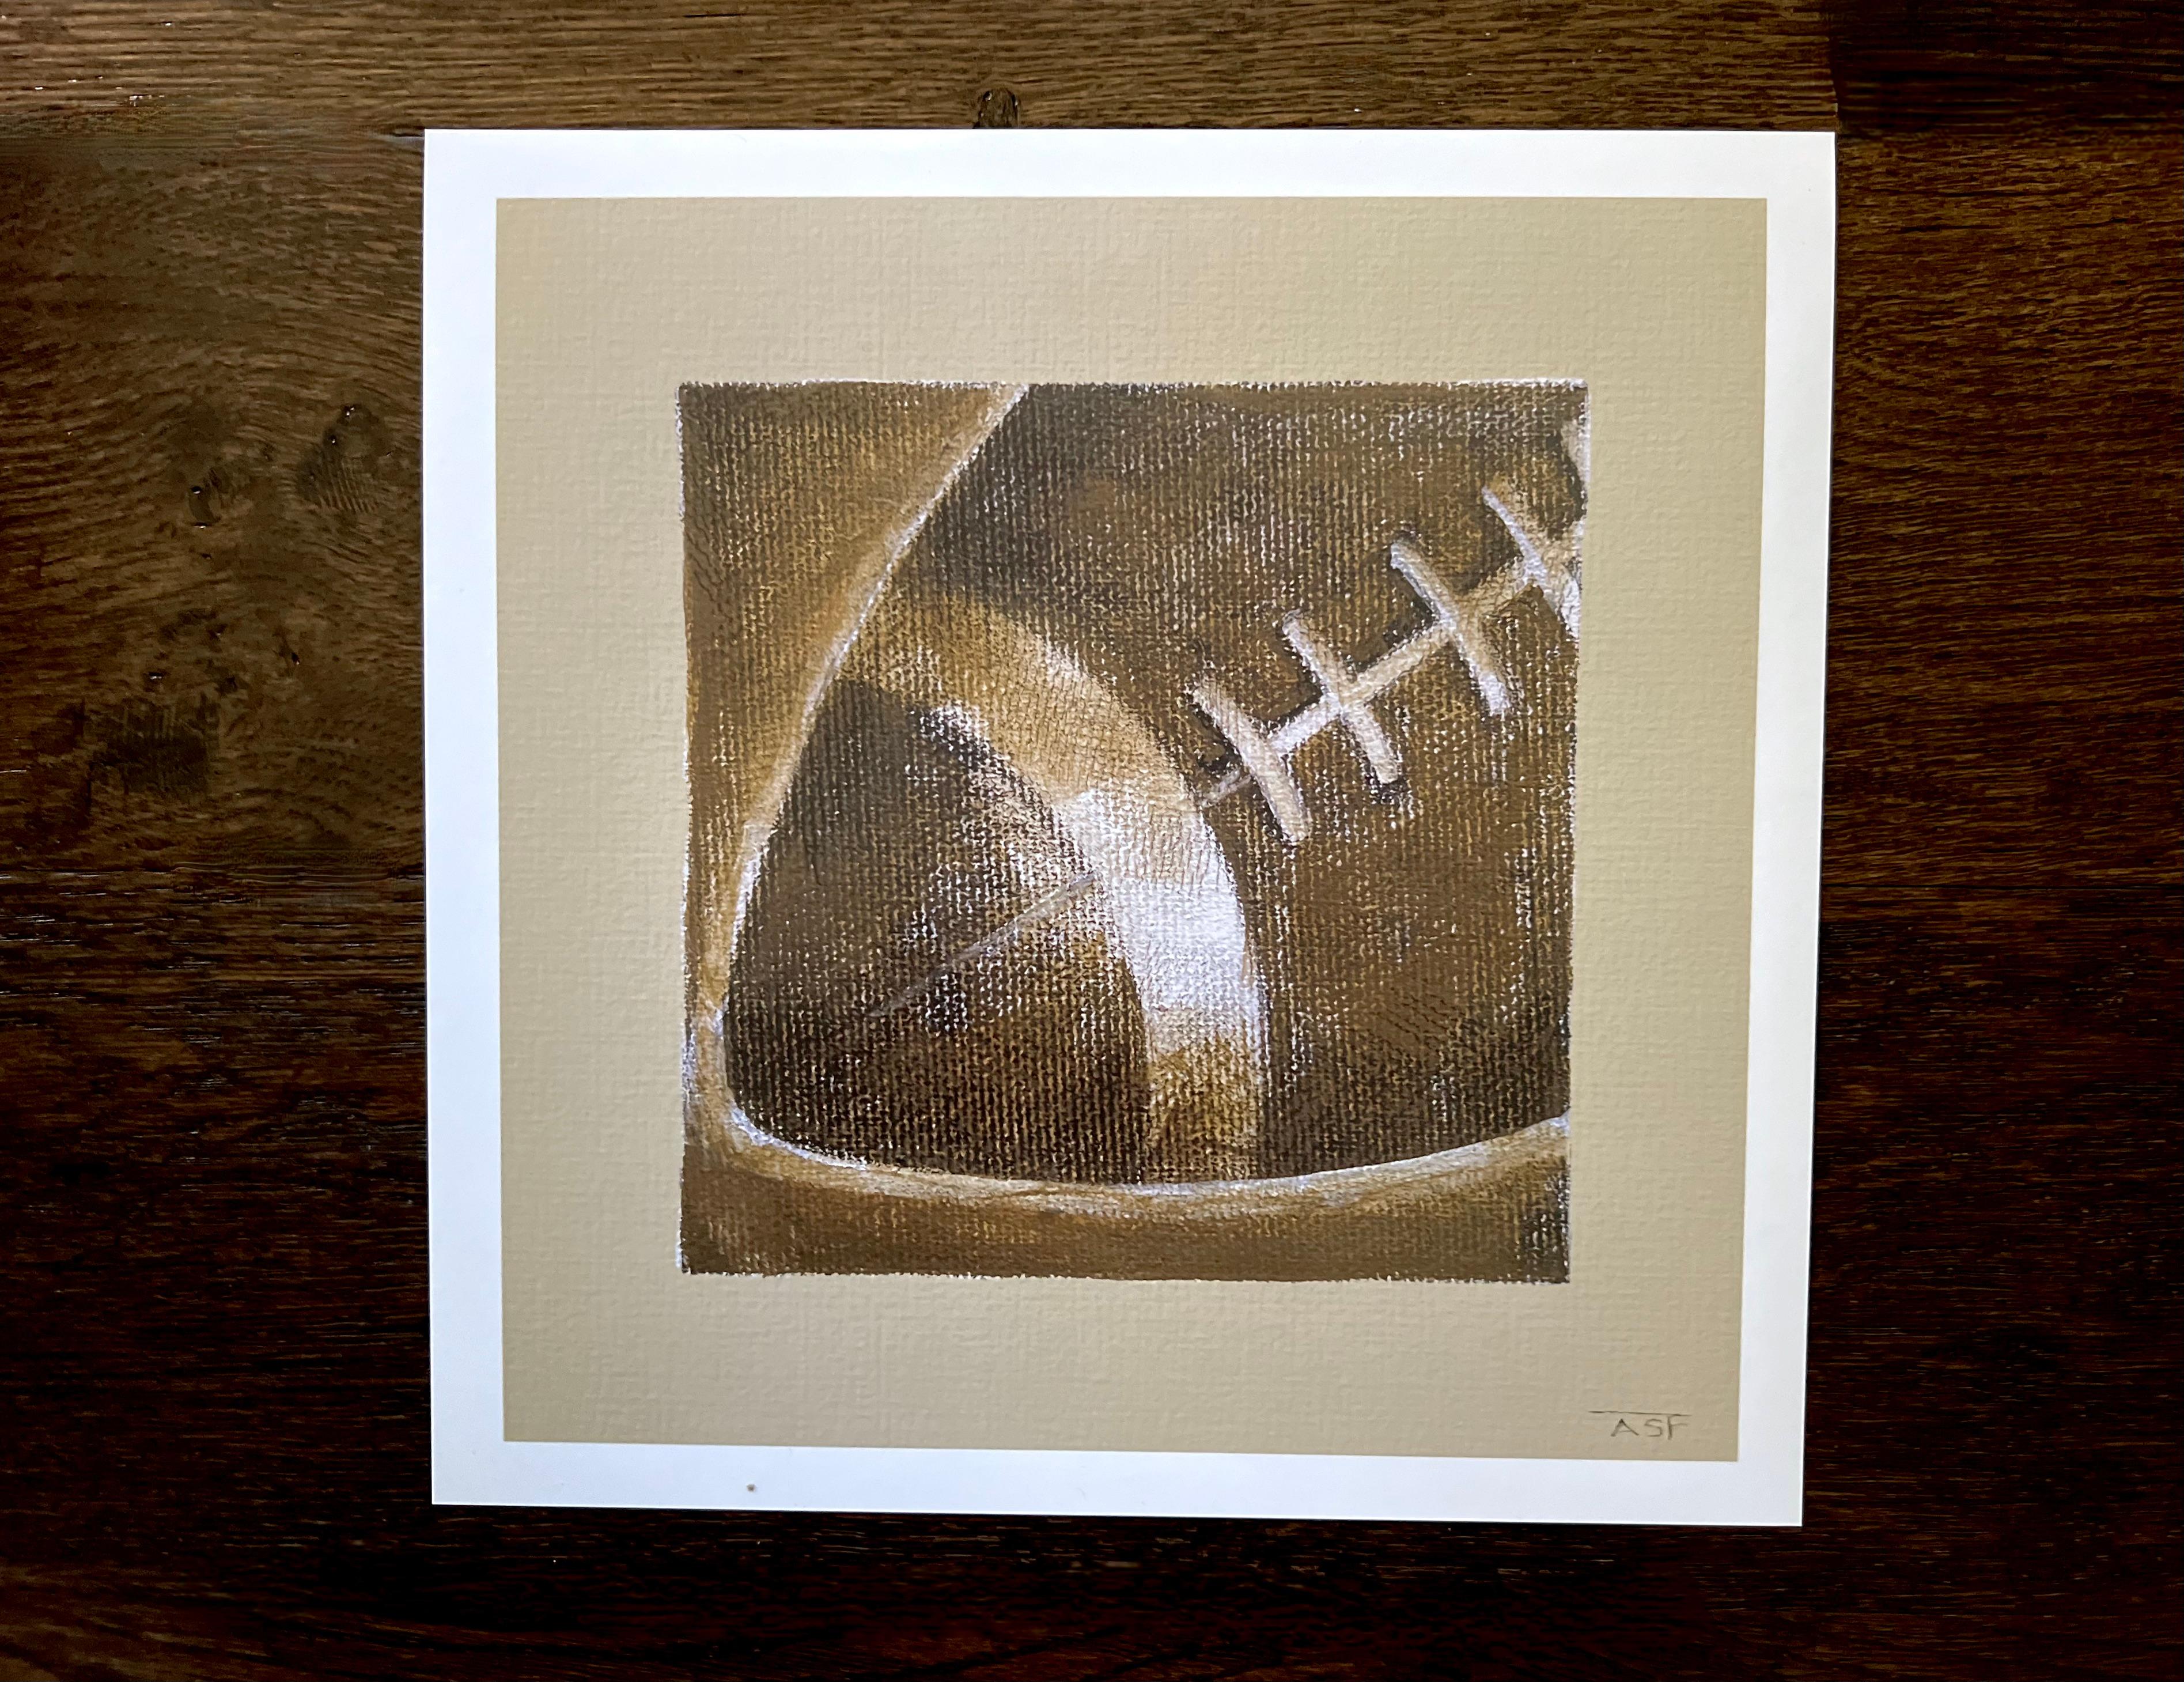 This Art Print on recycled paper features a football image for the one's who love the game. The contemporary and timeless aesthetic makes it perfect for a child's room or sports room. Hand signed on back. This is #4 from a series of four sport